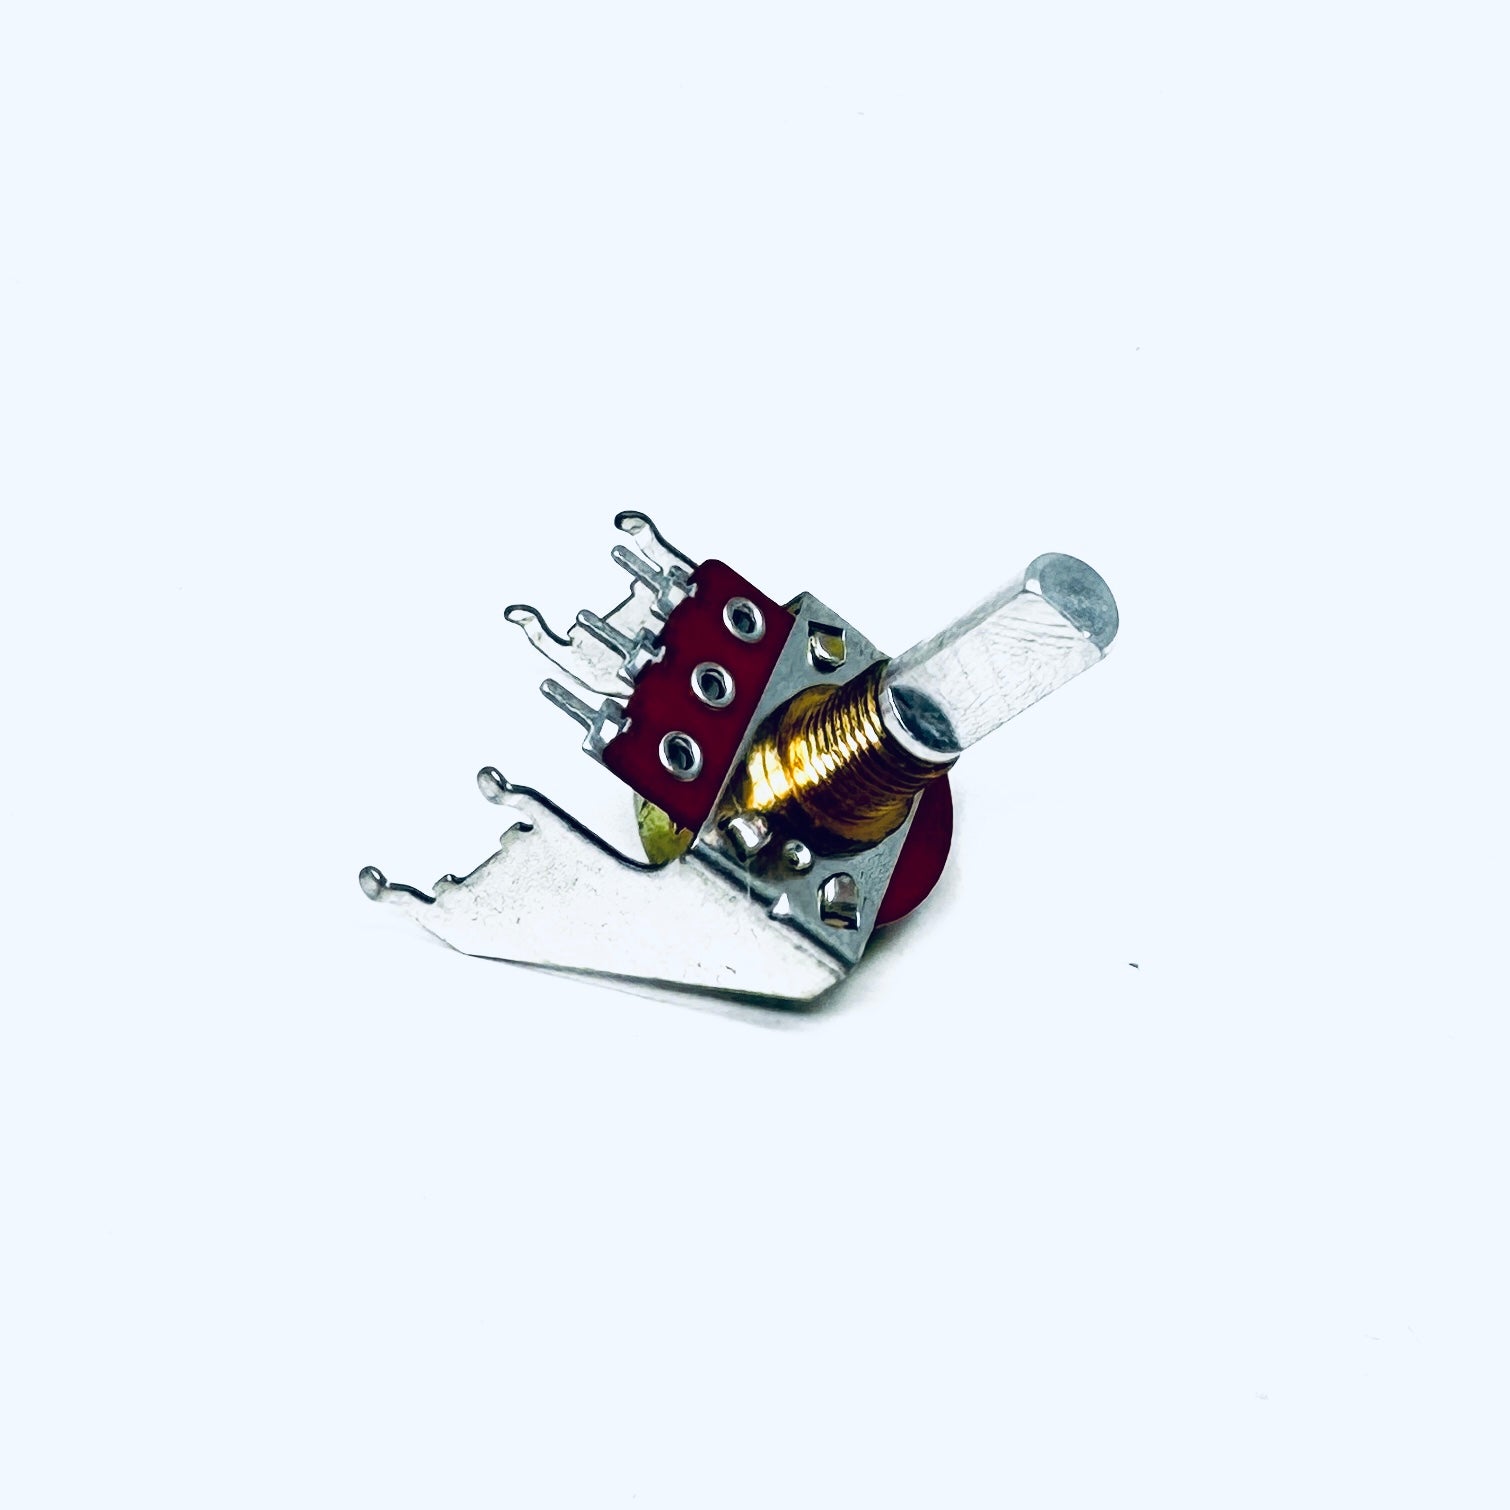 Authentic Fender Control Snapin 250k Taper Potentiometer, authentic fender replacment parts, ruby parts